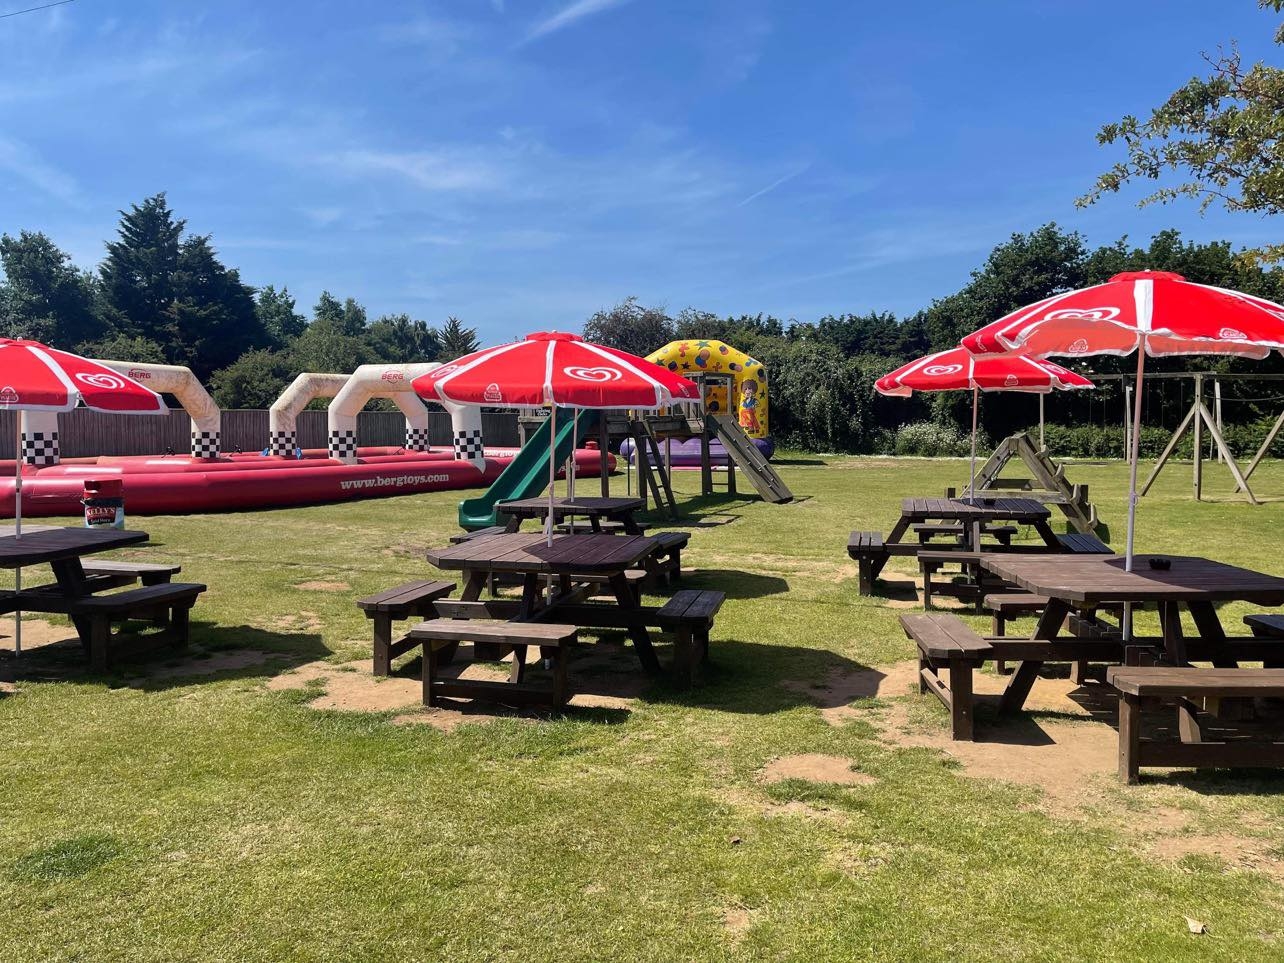 Beer garden with benches and umbrellas in the sun with bouncy castle in background